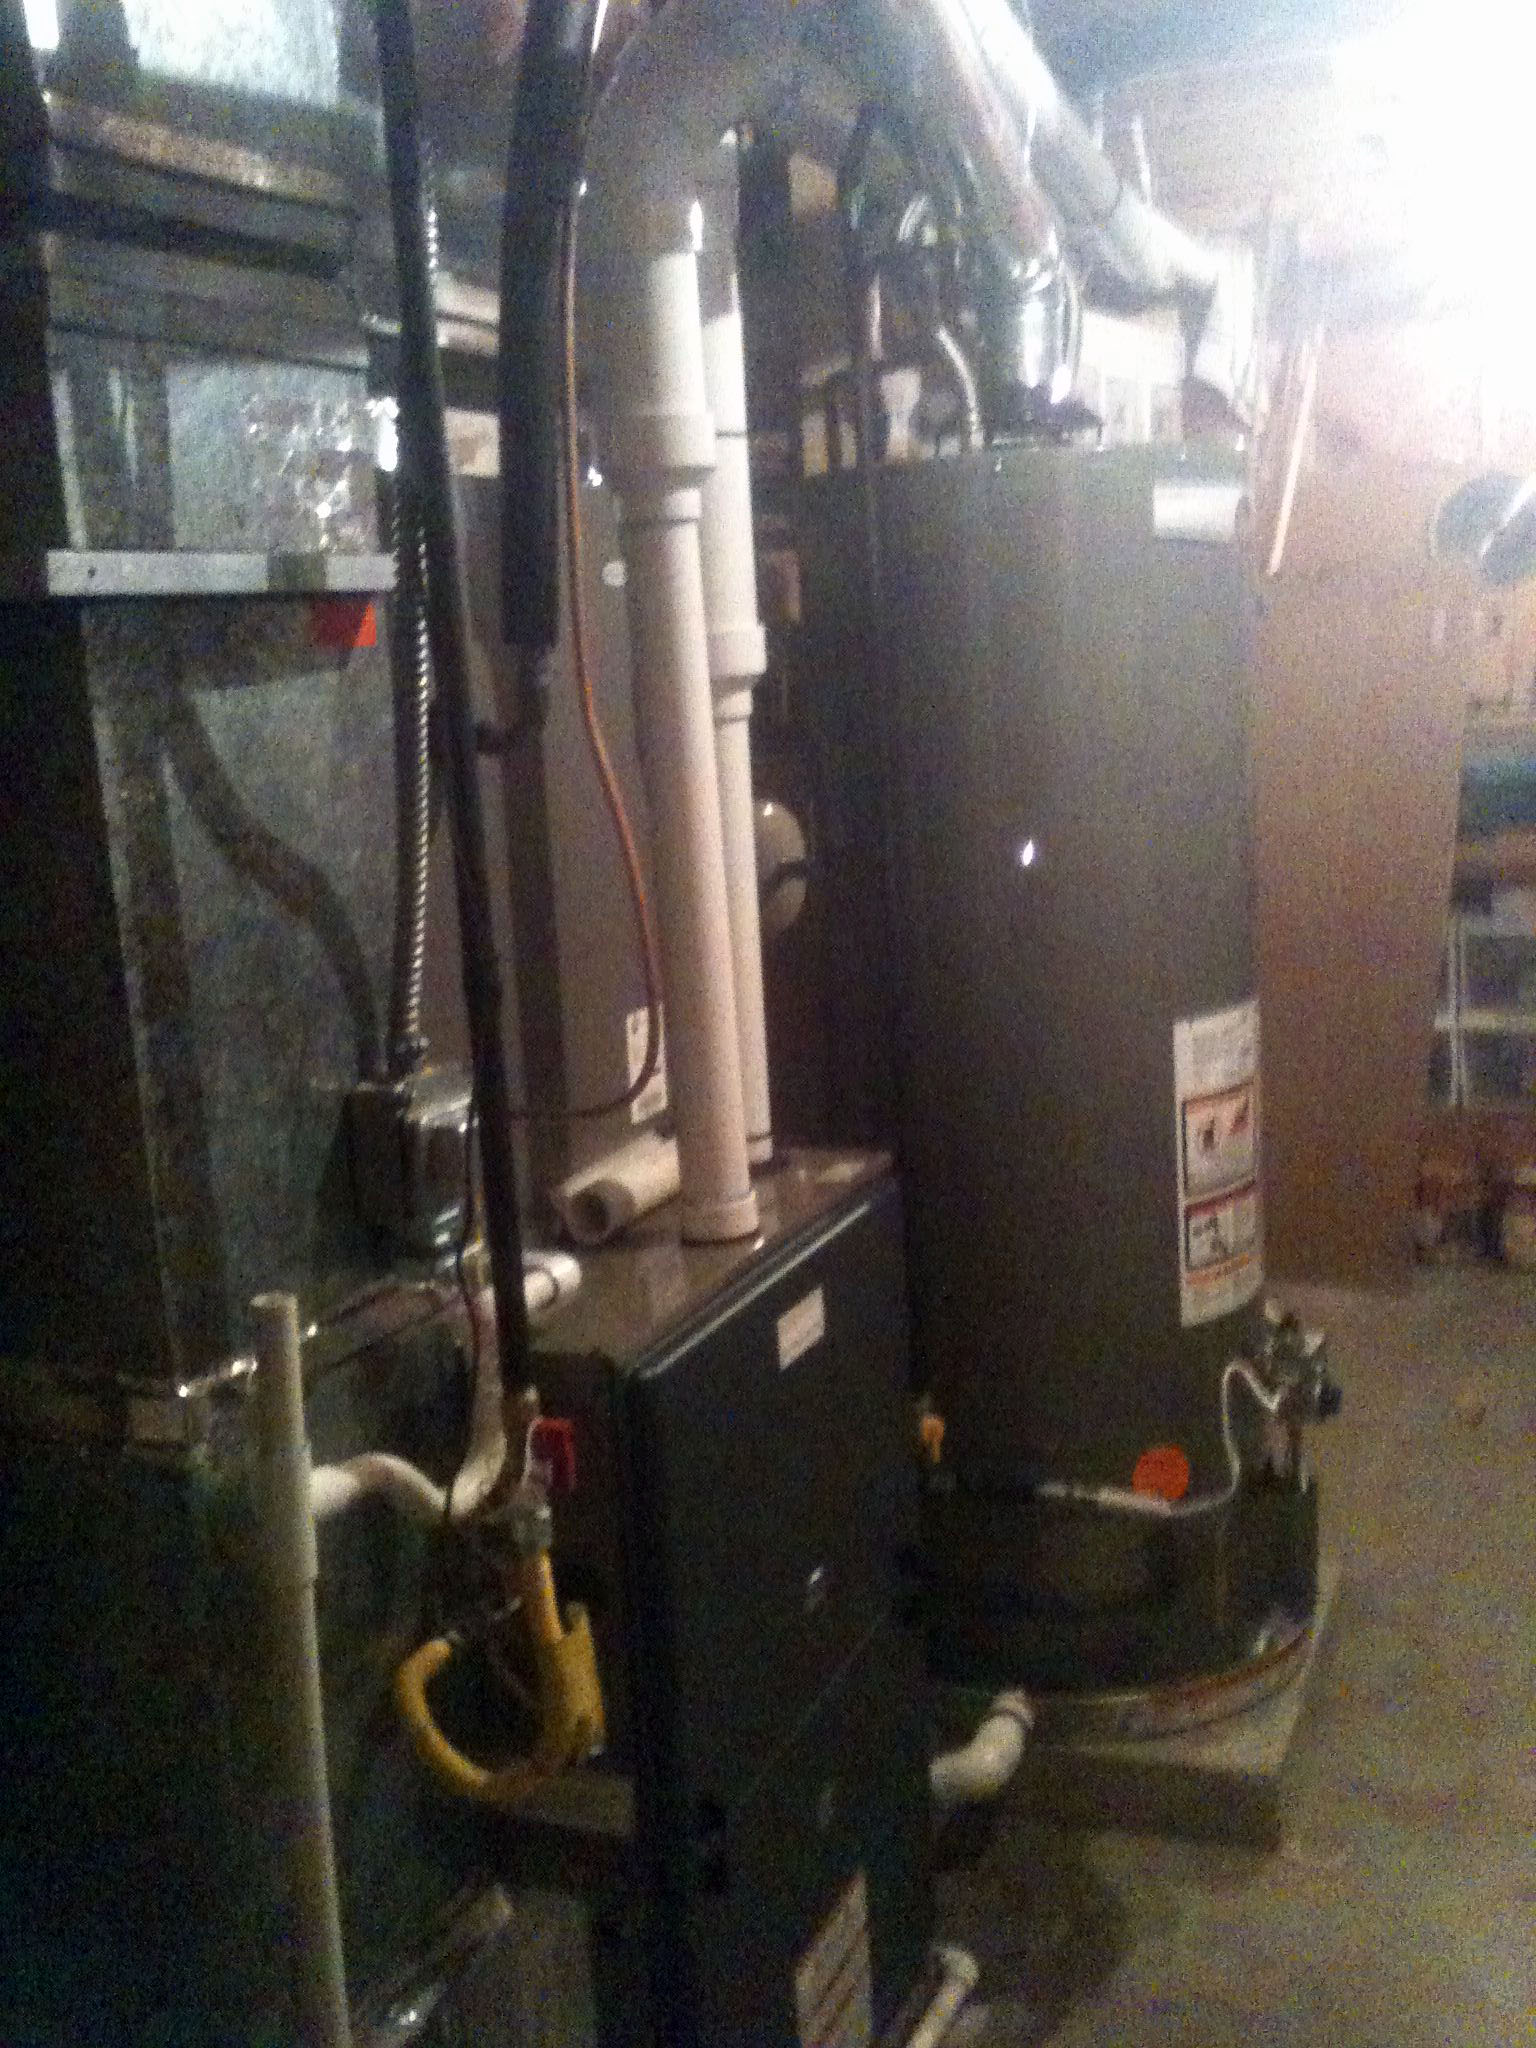 High Efficiency Residential System With Water Heater - Manitou Springs